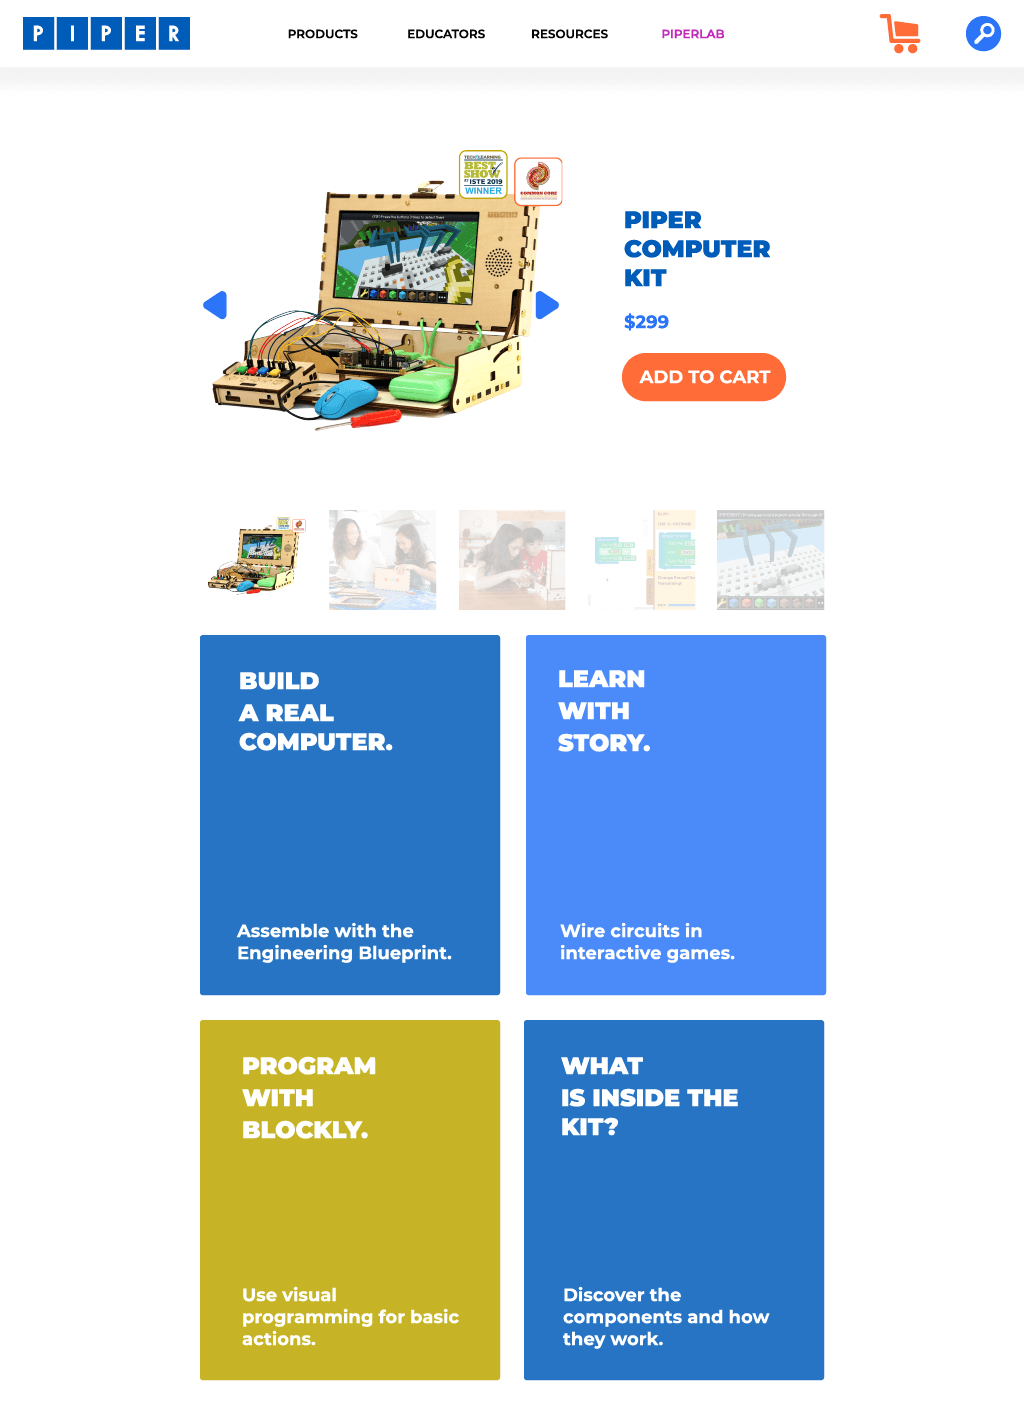 Mockups_Pipersite2020_ProductPage